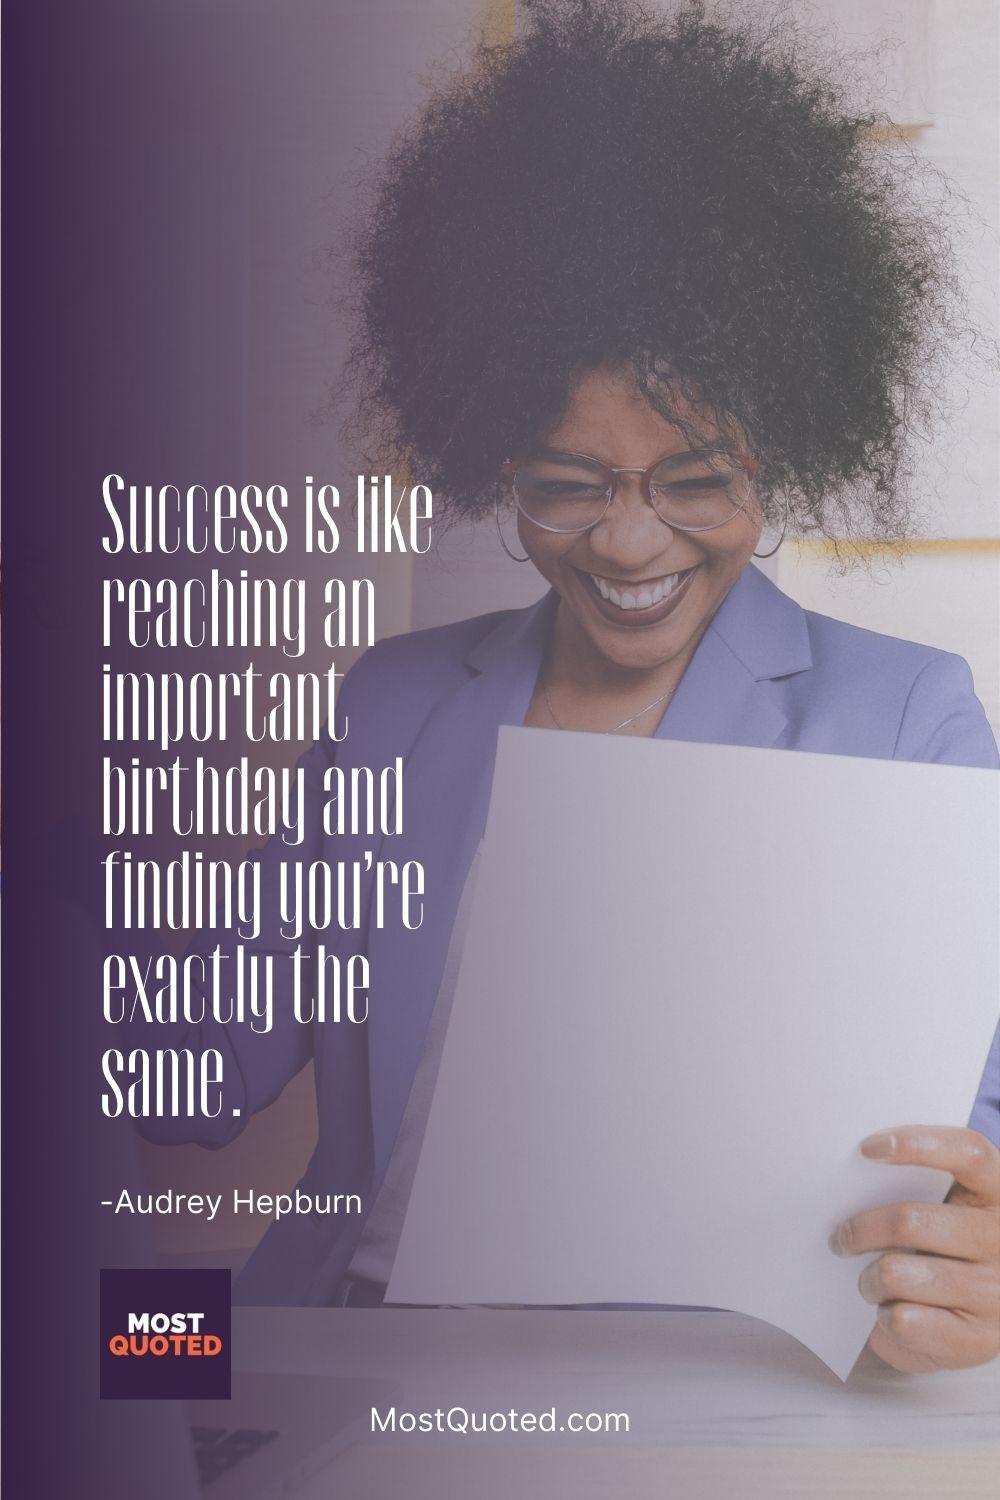 Success is like reaching an important birthday and finding you’re exactly the same. - Audrey Hepburn